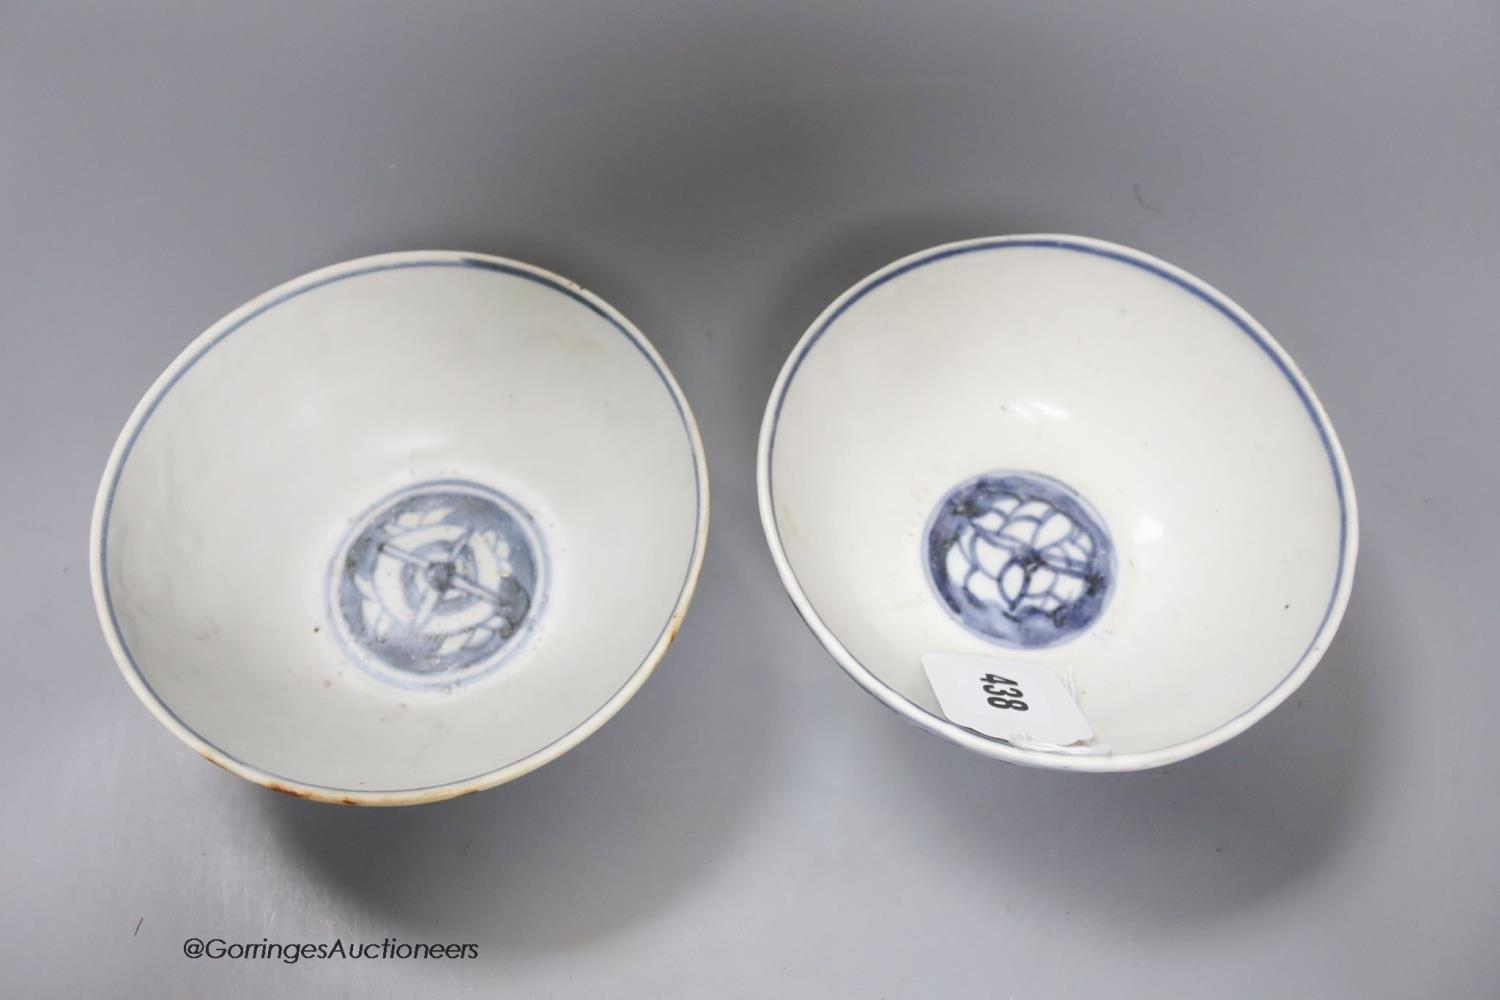 A pair of Chinese blue and white porcelain shipwreck bowls, 17th-century, diameter 15cm - Image 2 of 4